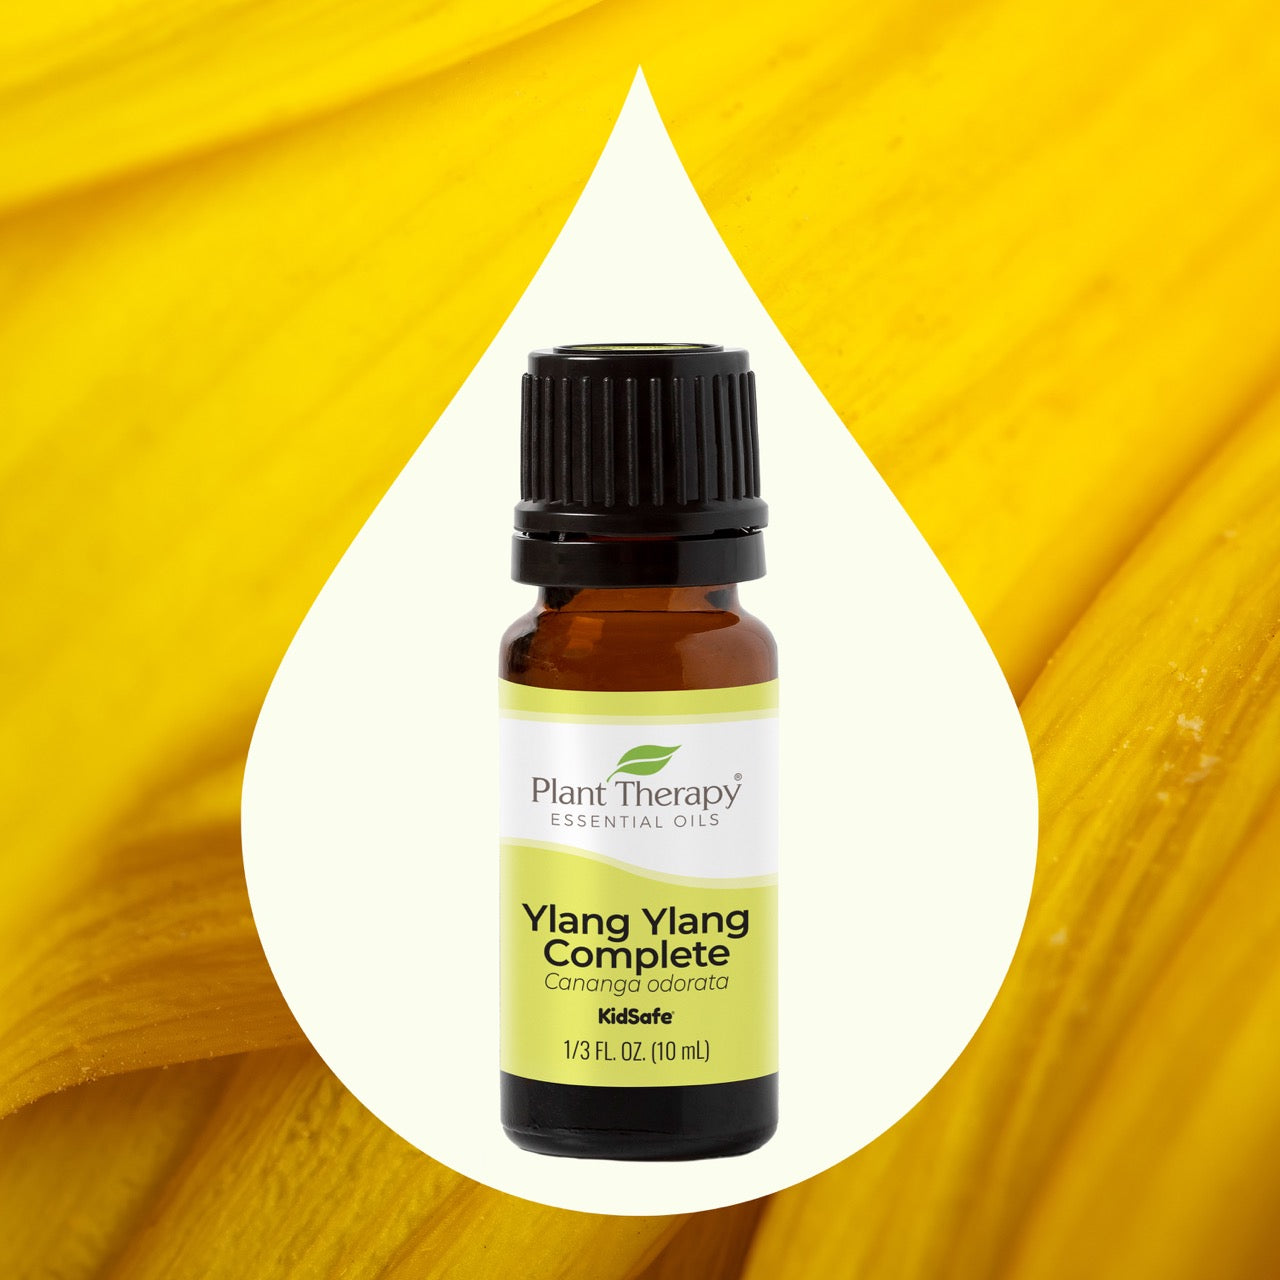 Ylang Ylang Complete Essential Oil with key ingredient image